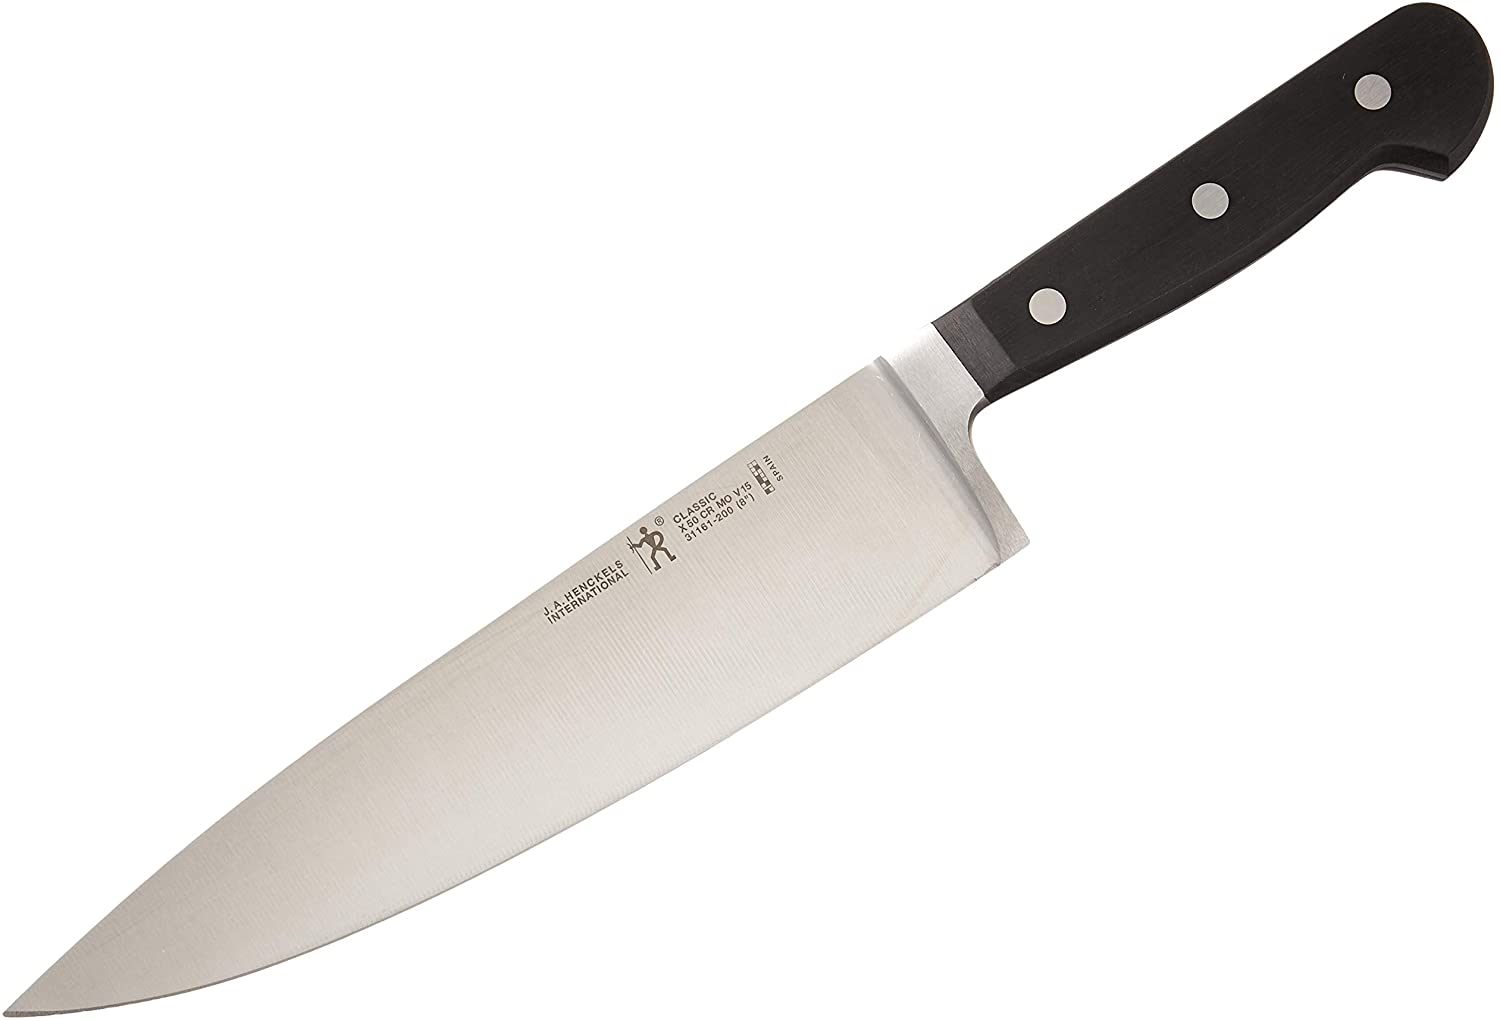 J.A. Henckels International 8-inch Chef’s Knife with High-carbon Stainless